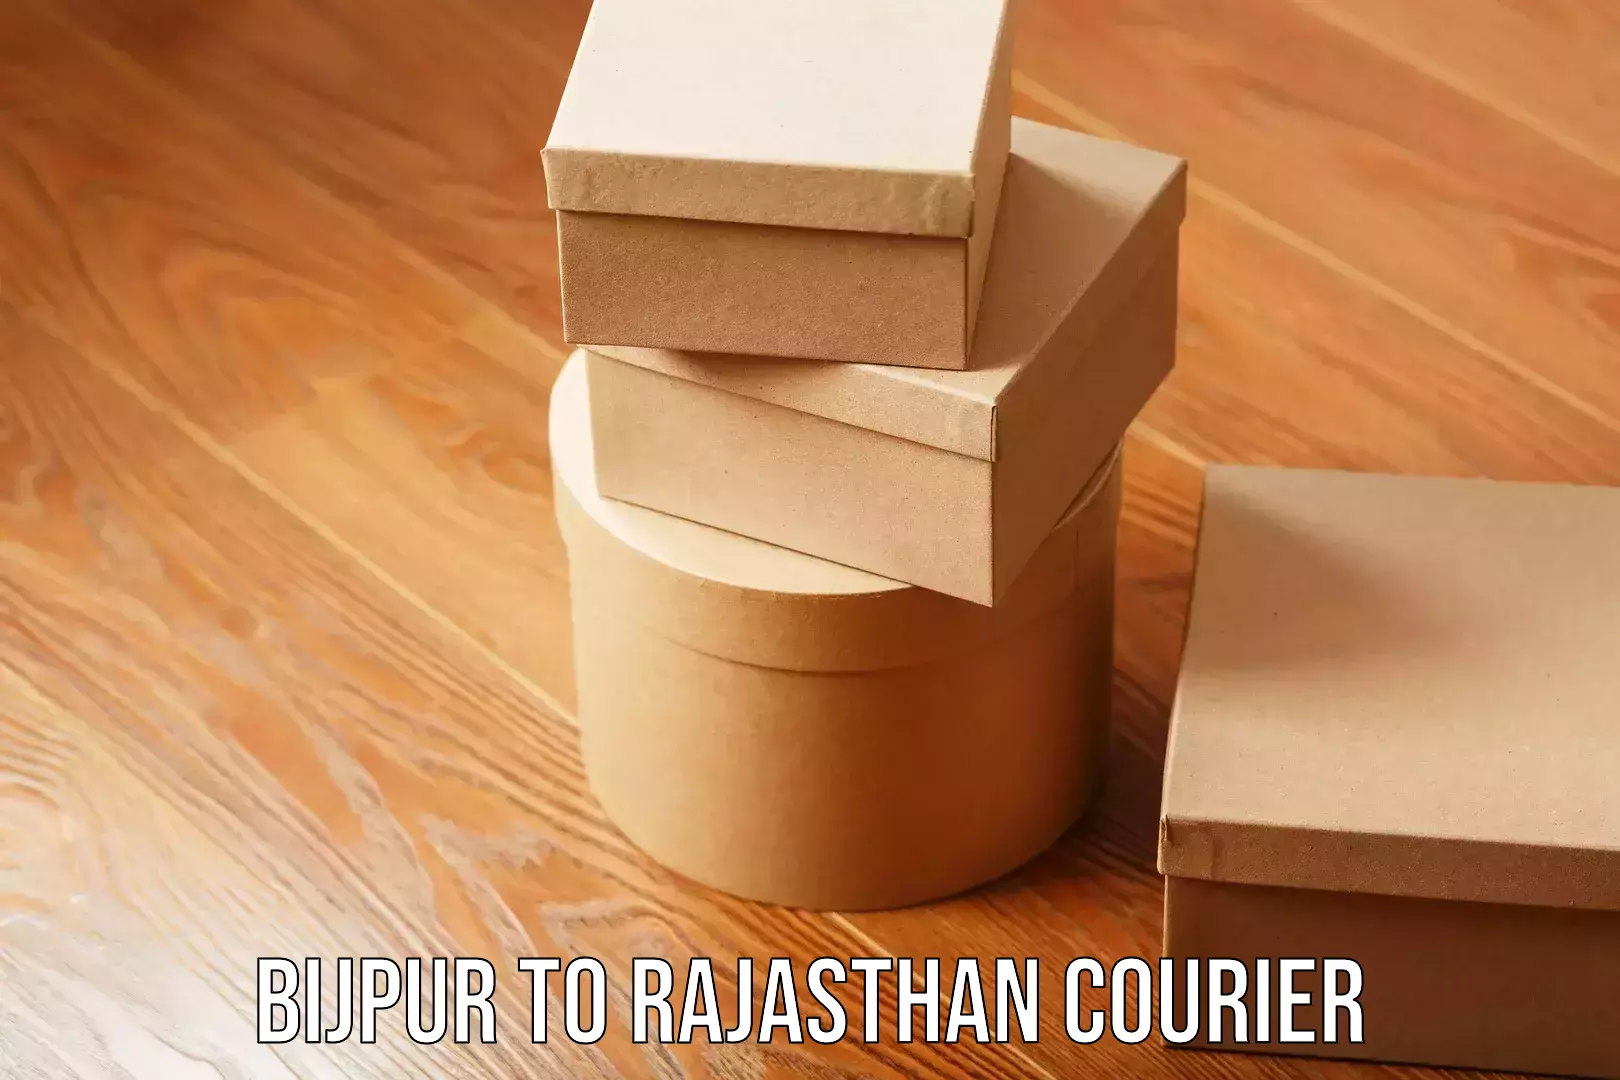 Courier insurance Bijpur to Rajasthan